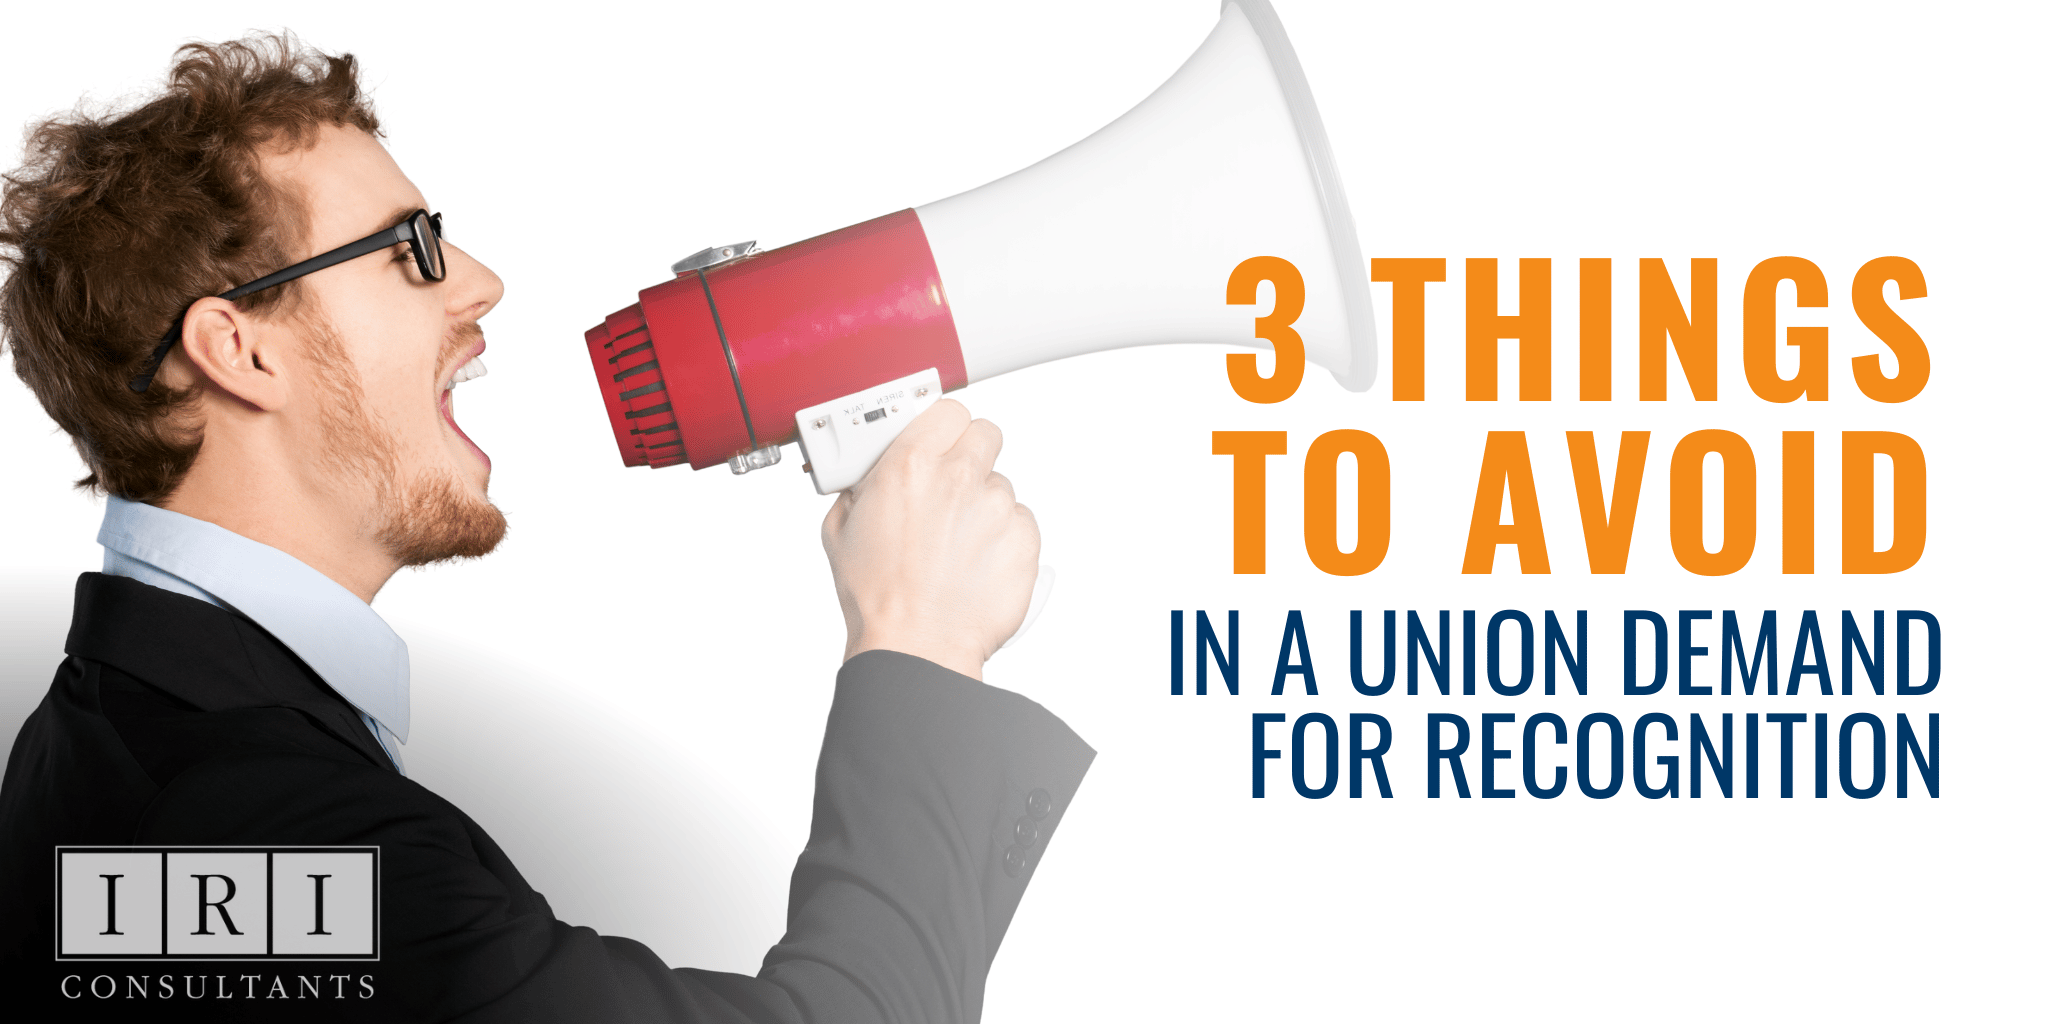 3 Things To Avoid In A Union Demand for Recognition